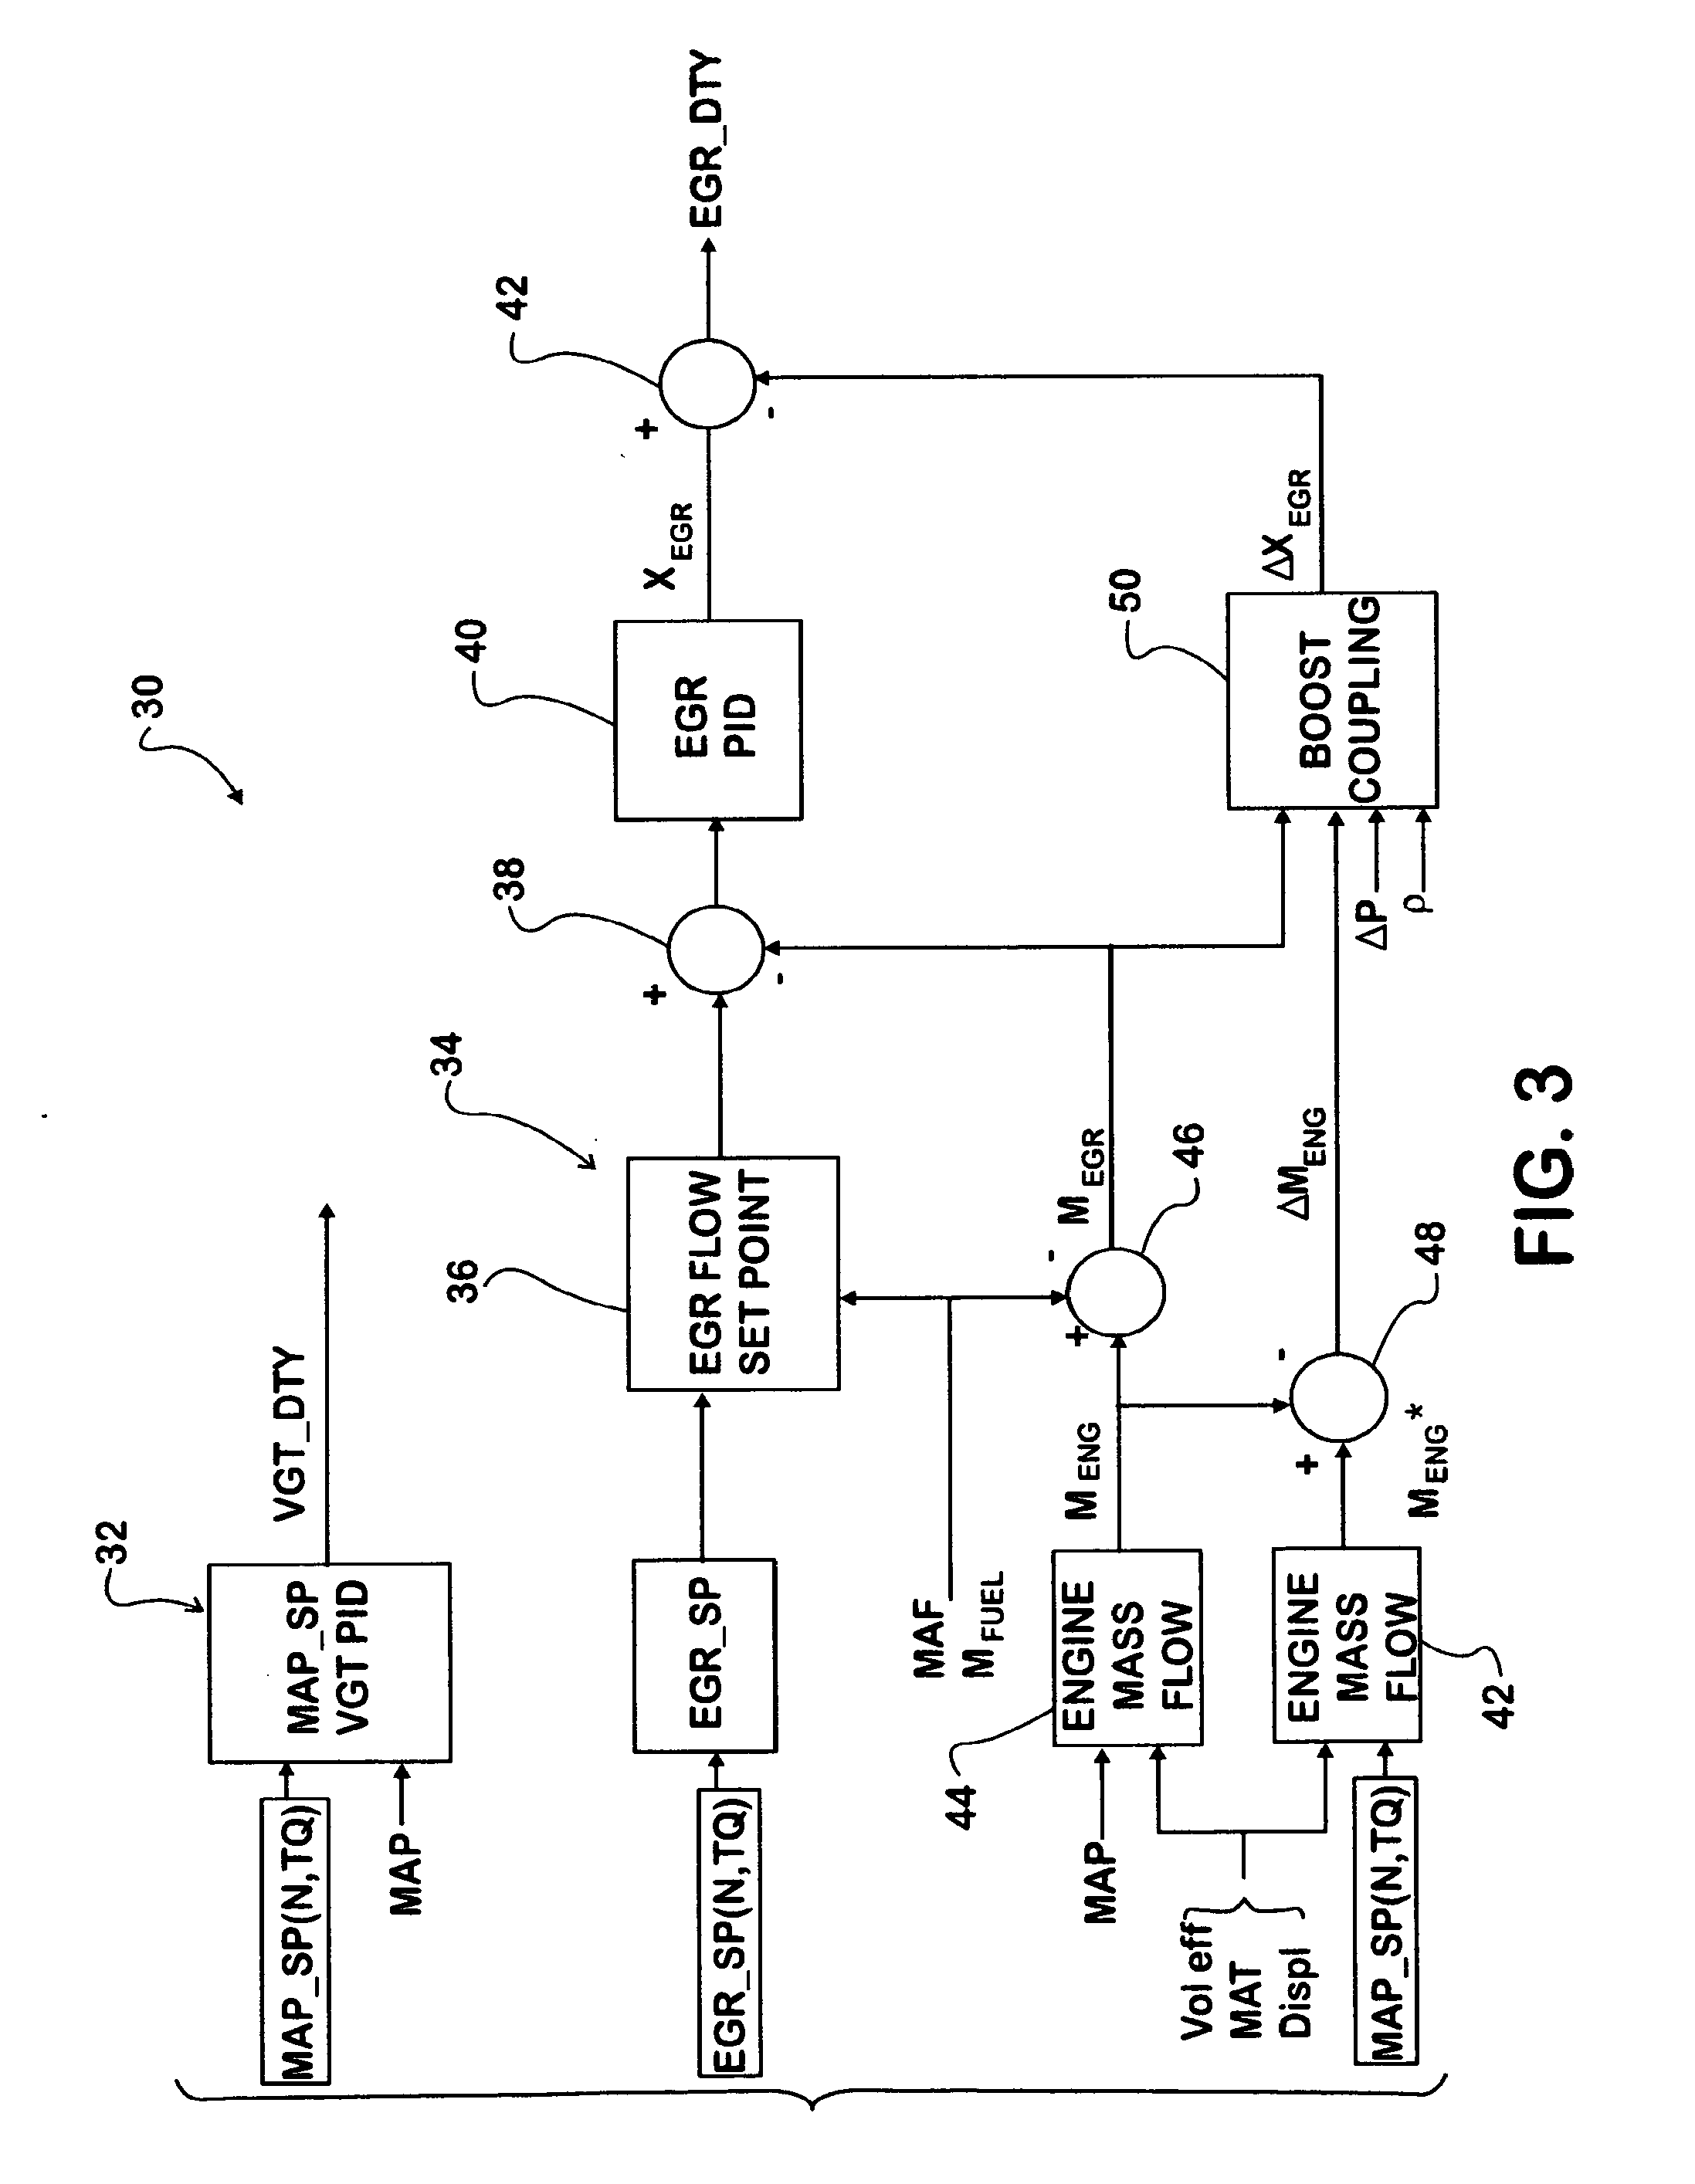 Strategy For Control Of Recirculated Exhaust Gas To Null Turbocharger Boost Error